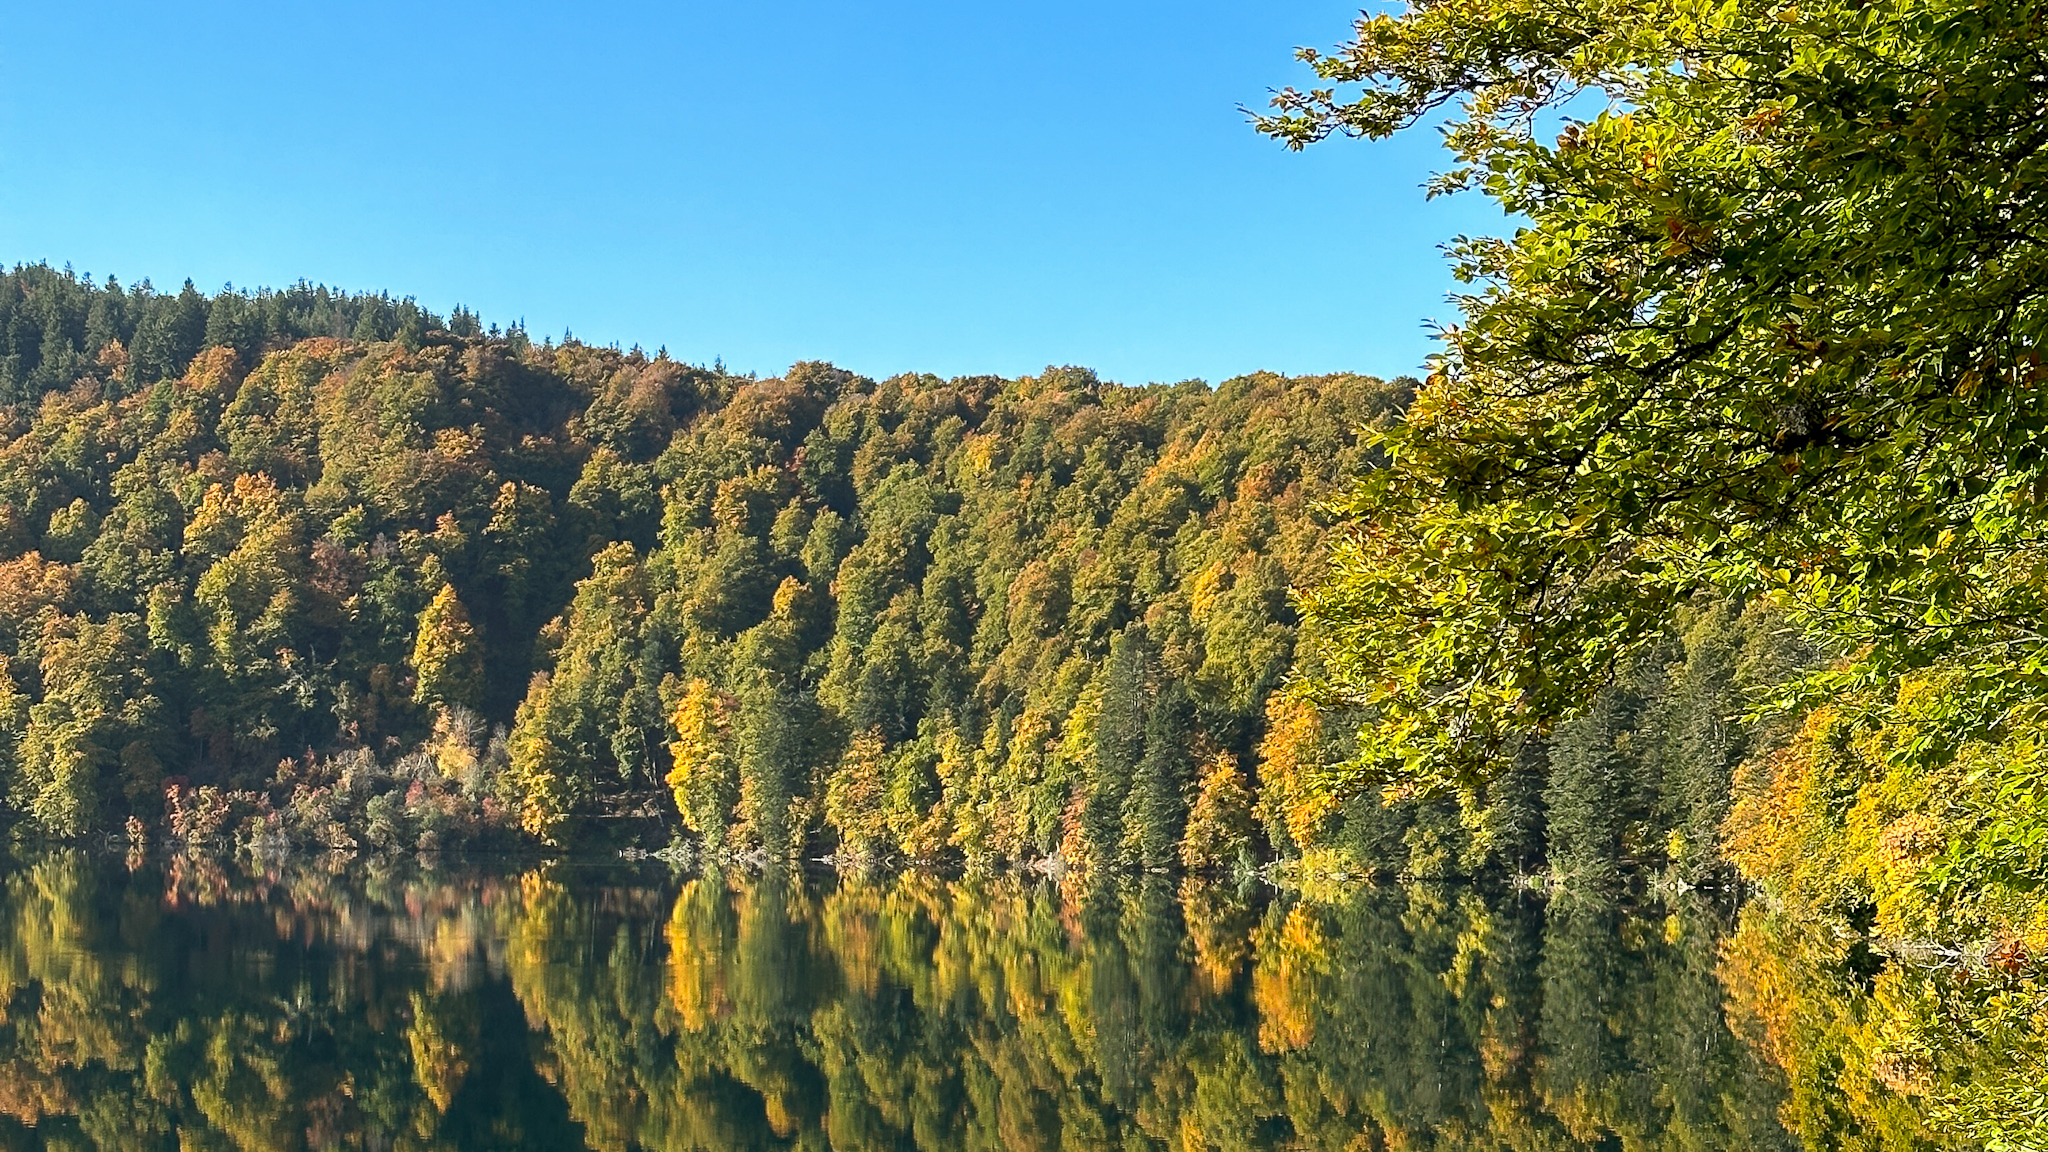 The trees are adorned with fall colors at Lac Pavin